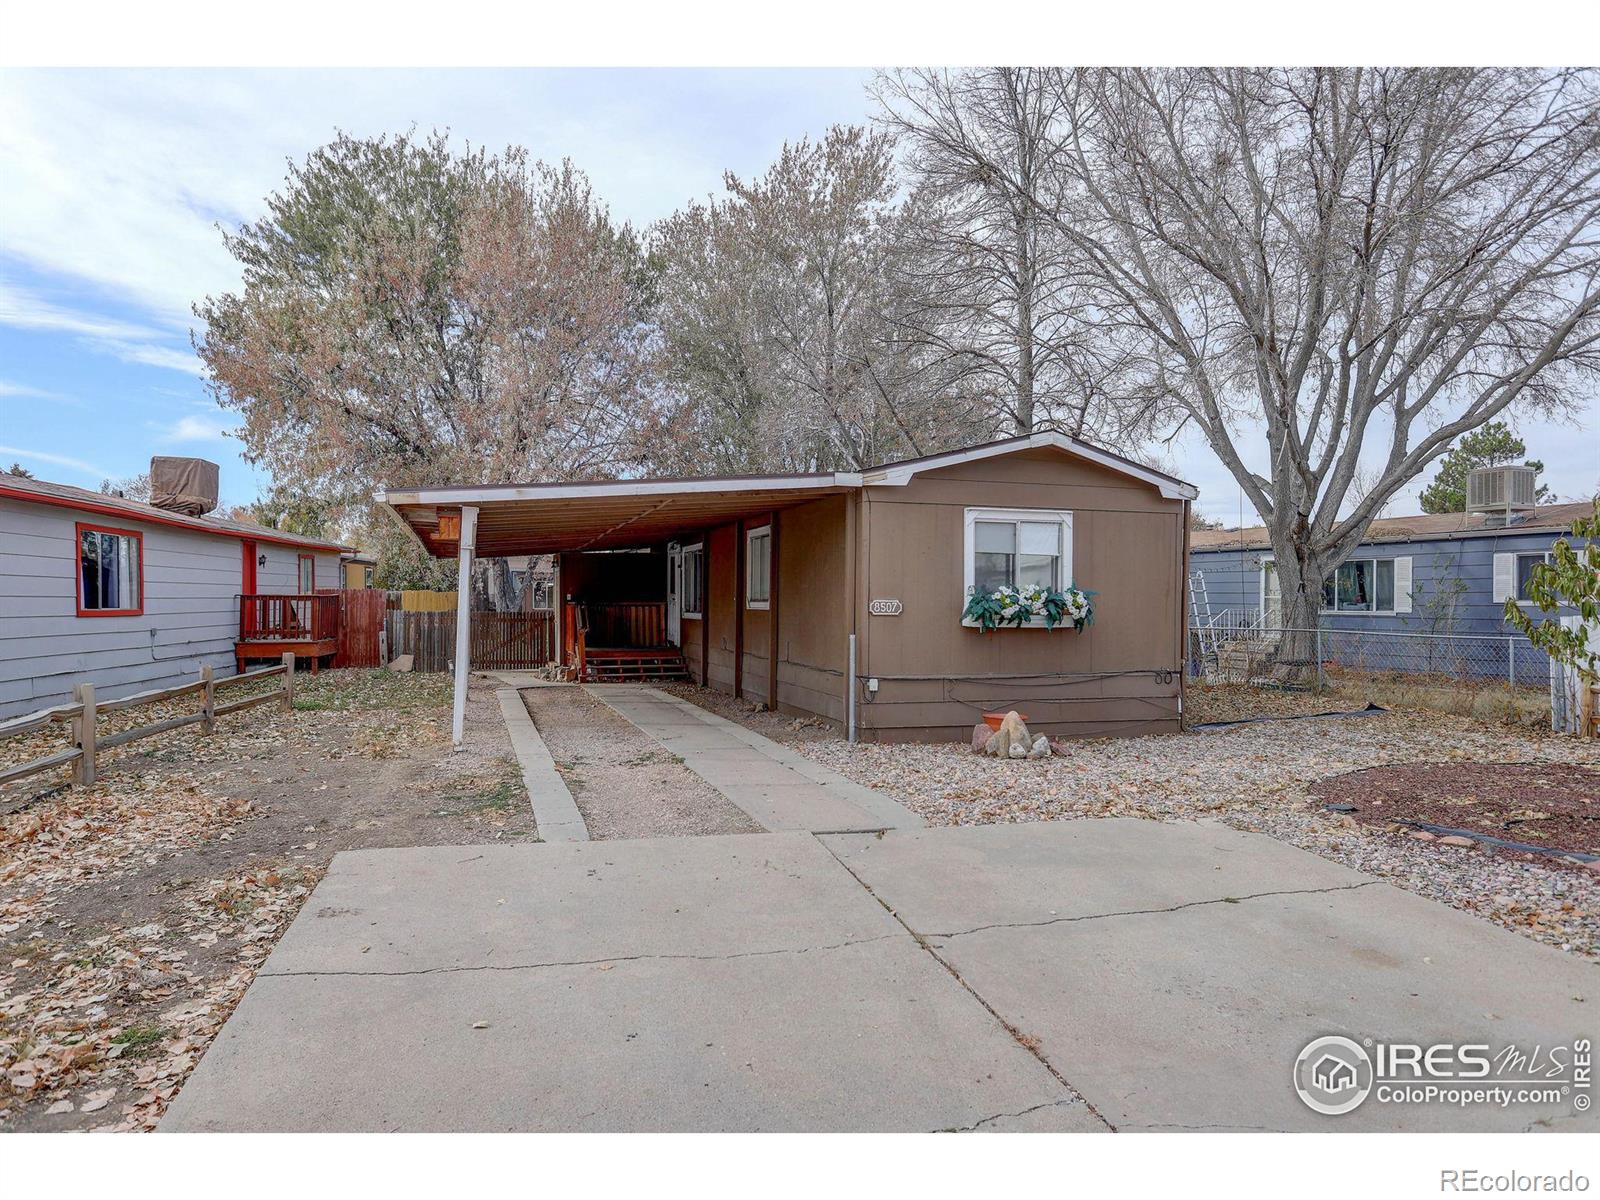 8507  mummy range drive, Fort Collins sold home. Closed on 2024-02-23 for $230,000.